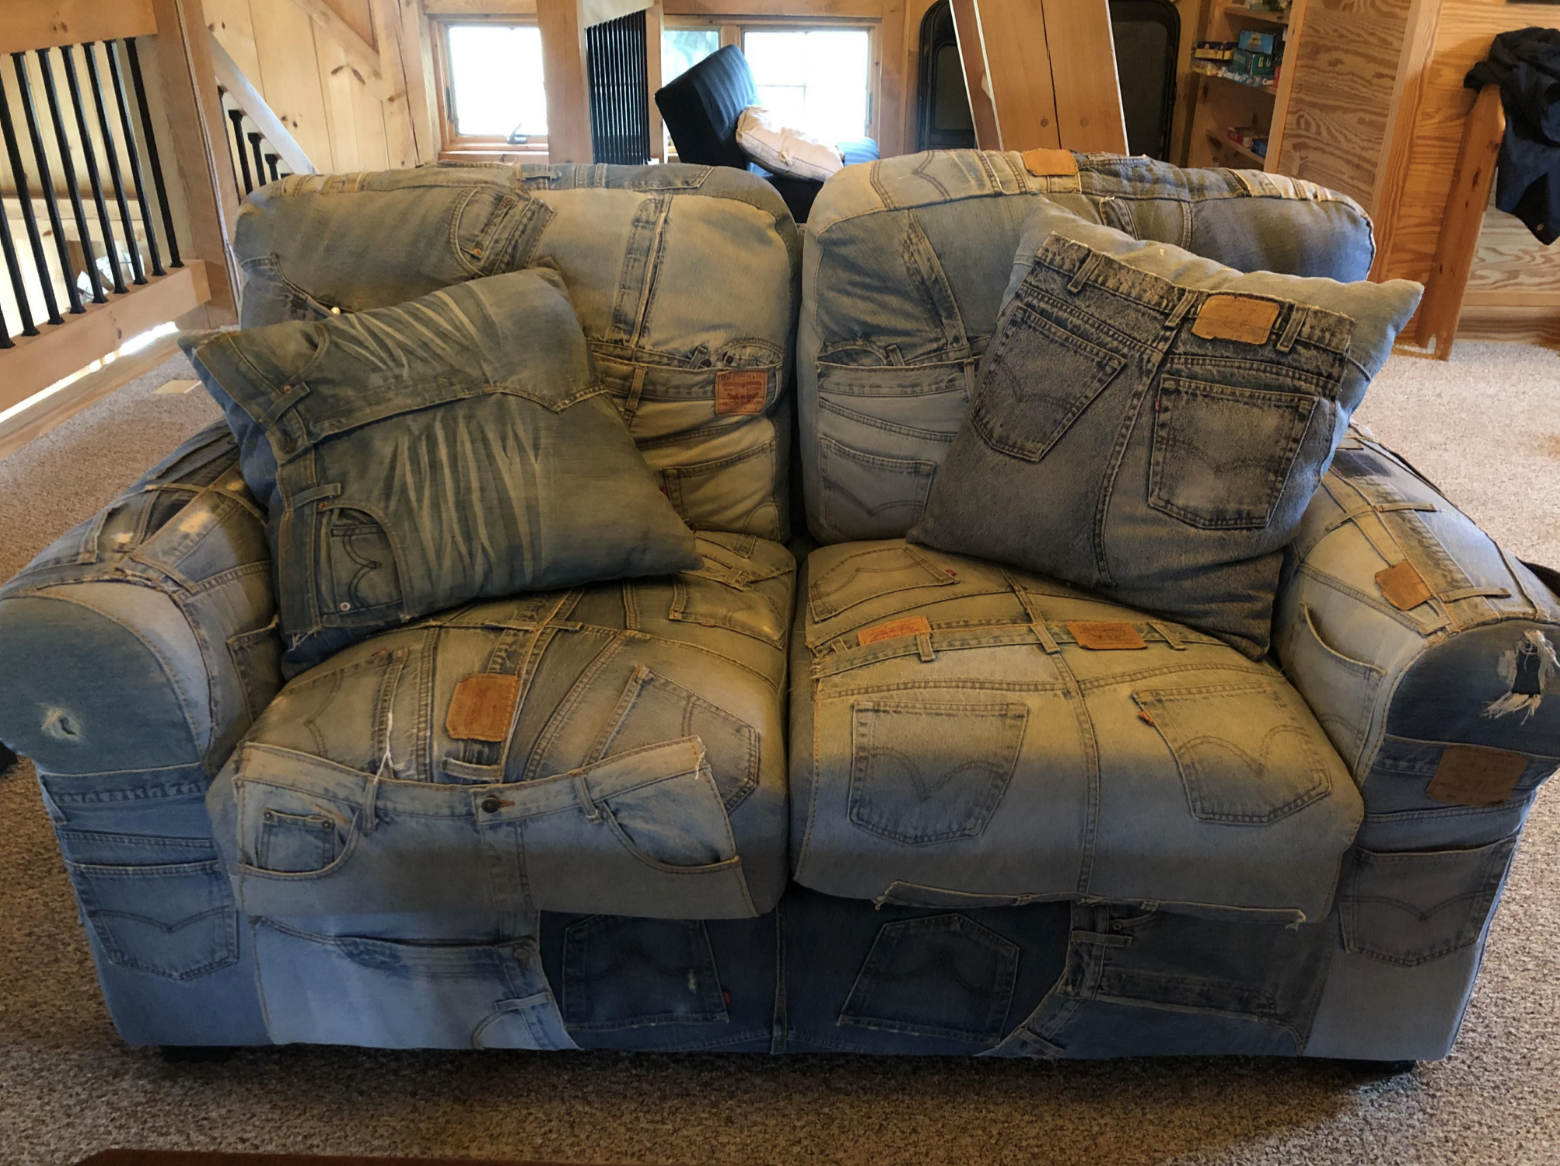 A denim couch